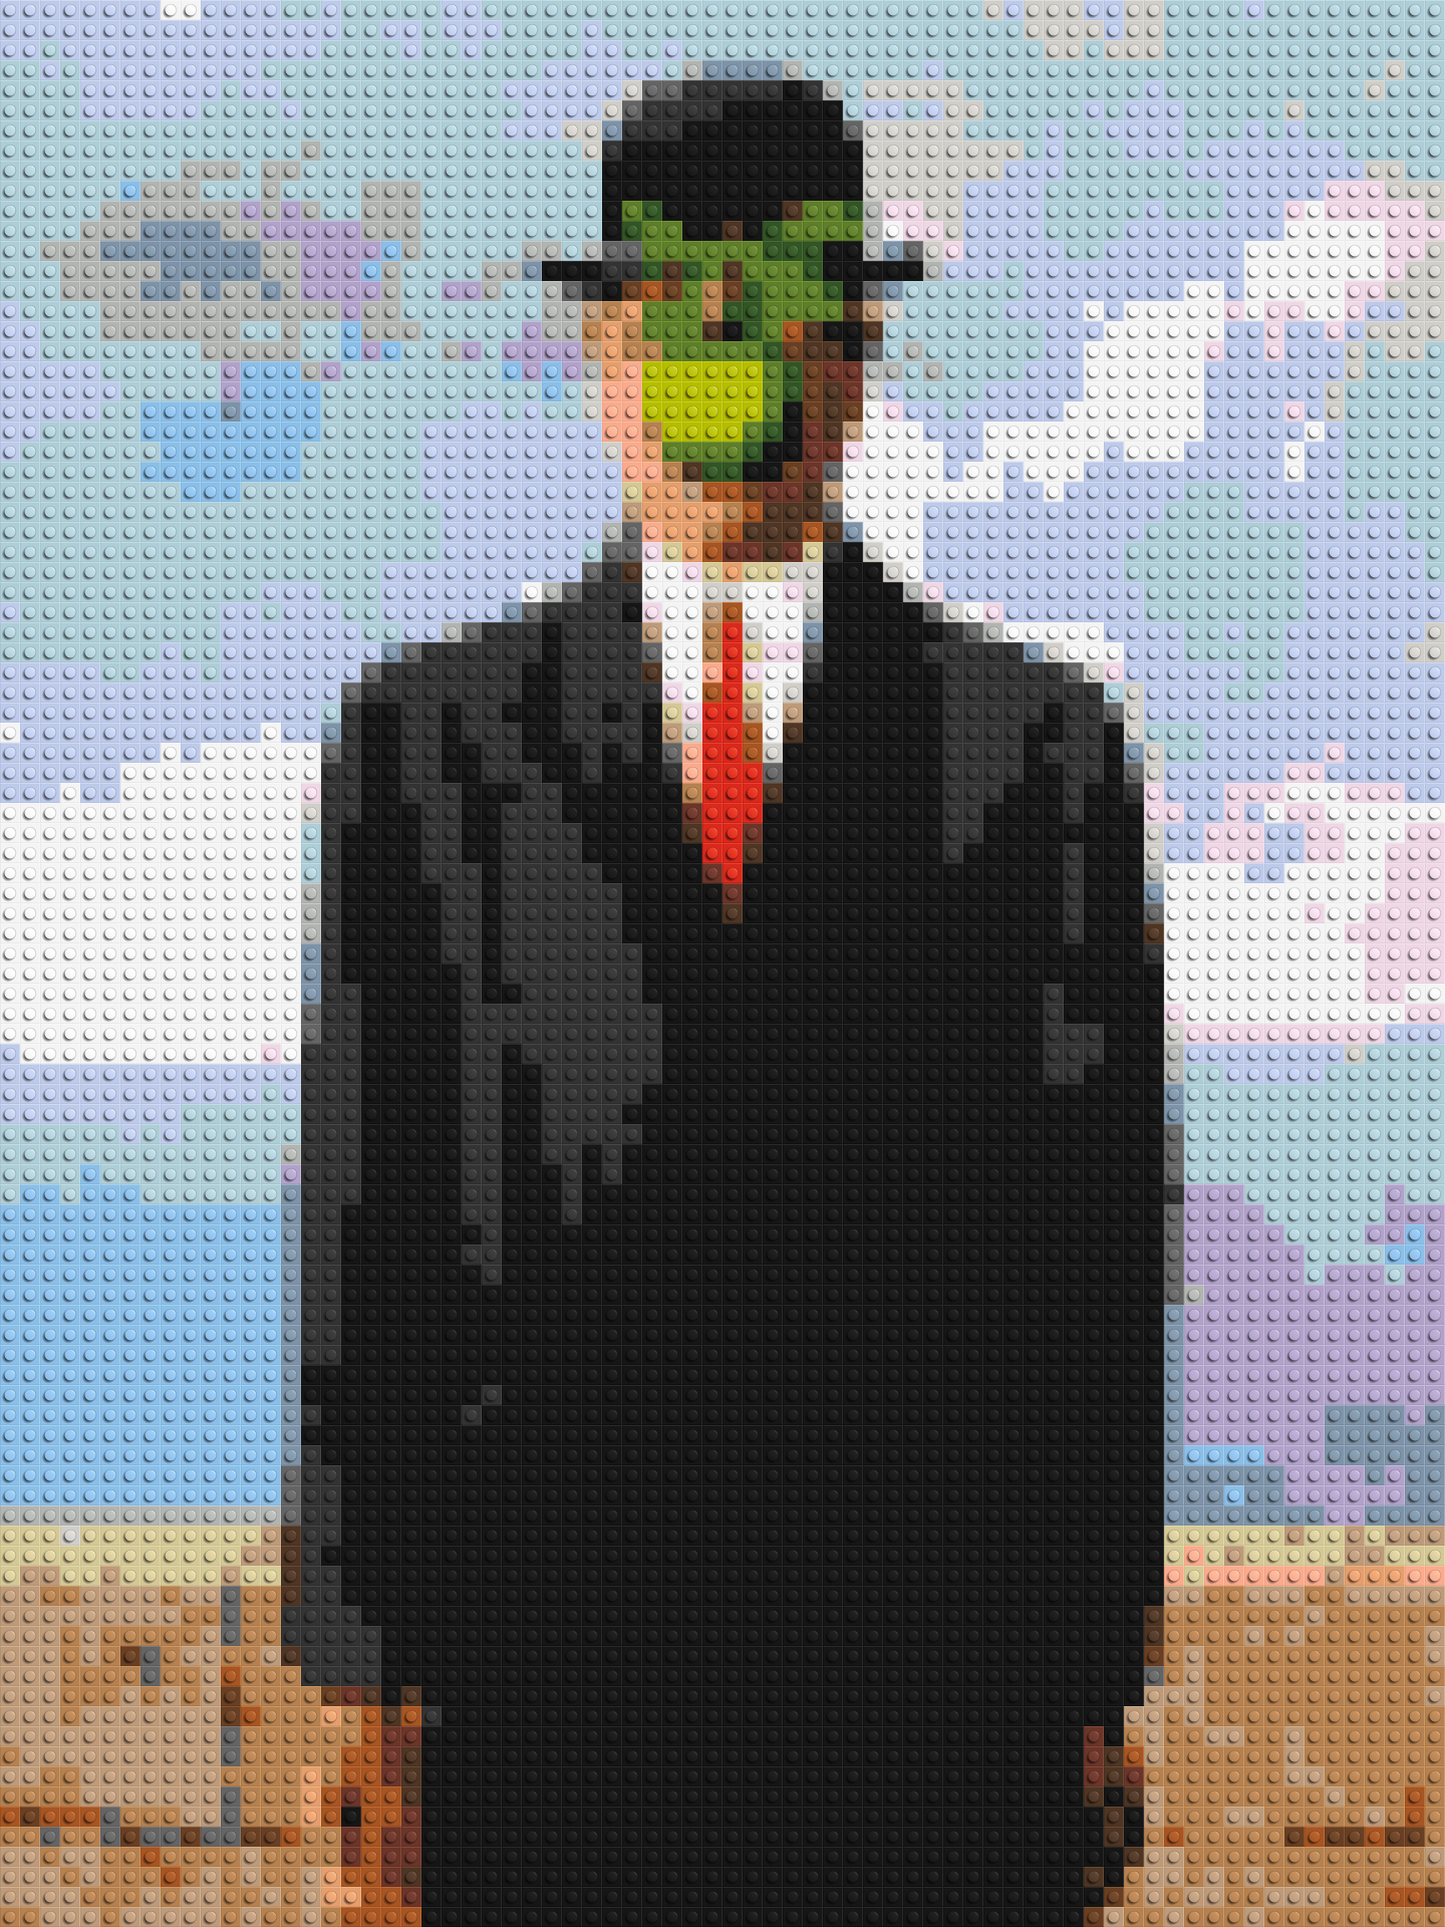 The Son of Man by René Magritte - Brick Art Mosaic Kit 3x4 large